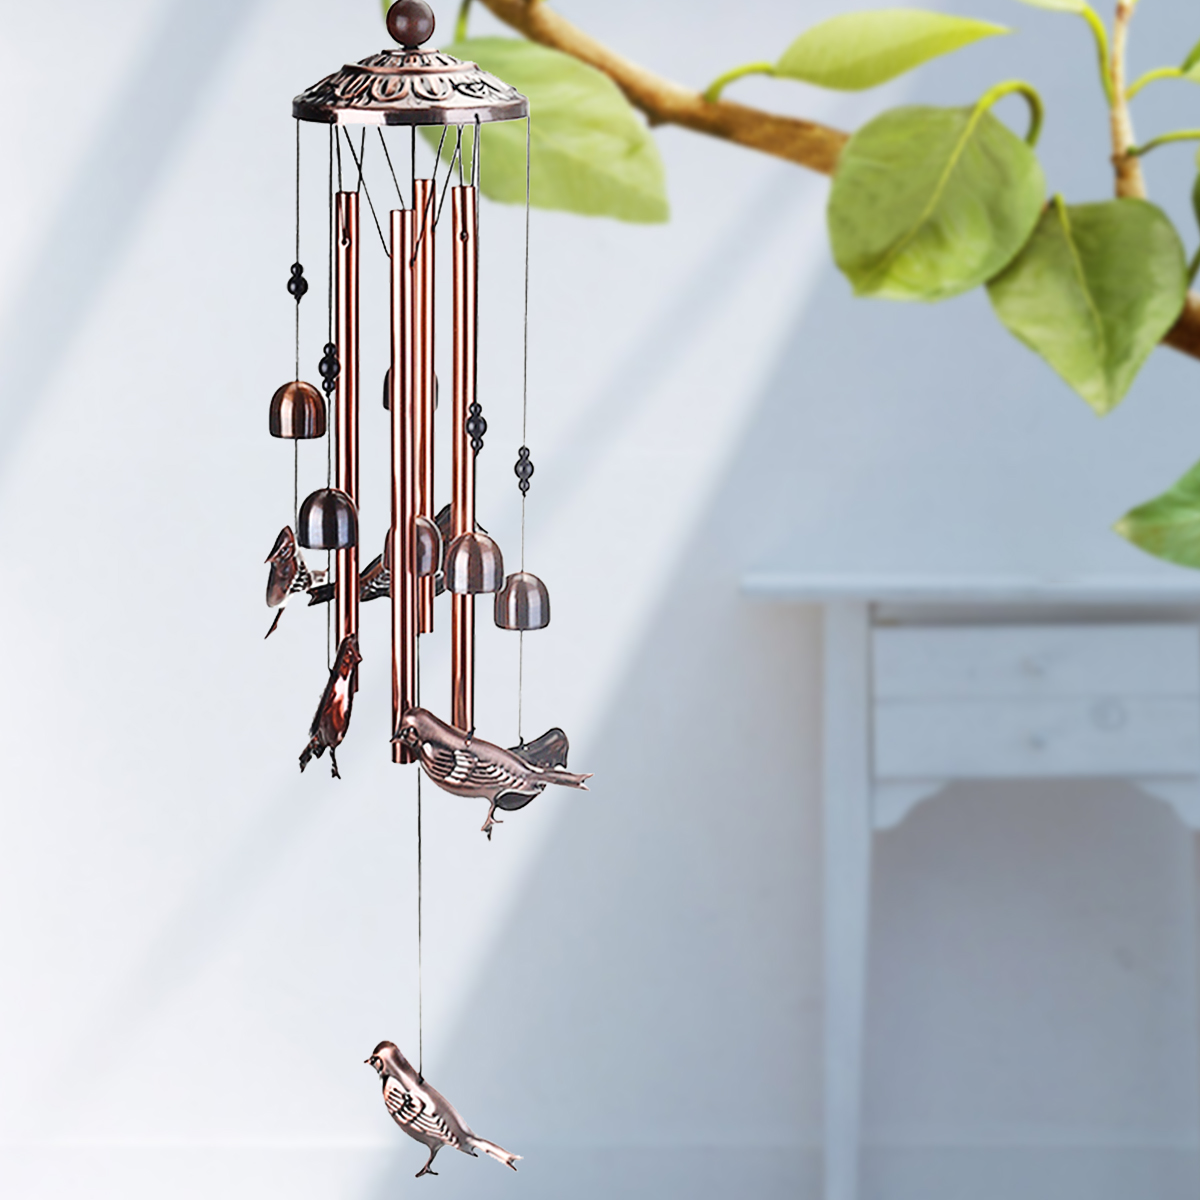 Brass-Bell-Wind-Chime-Ornaments-European-And-American-Garden-Home-Decoration-1777951-3